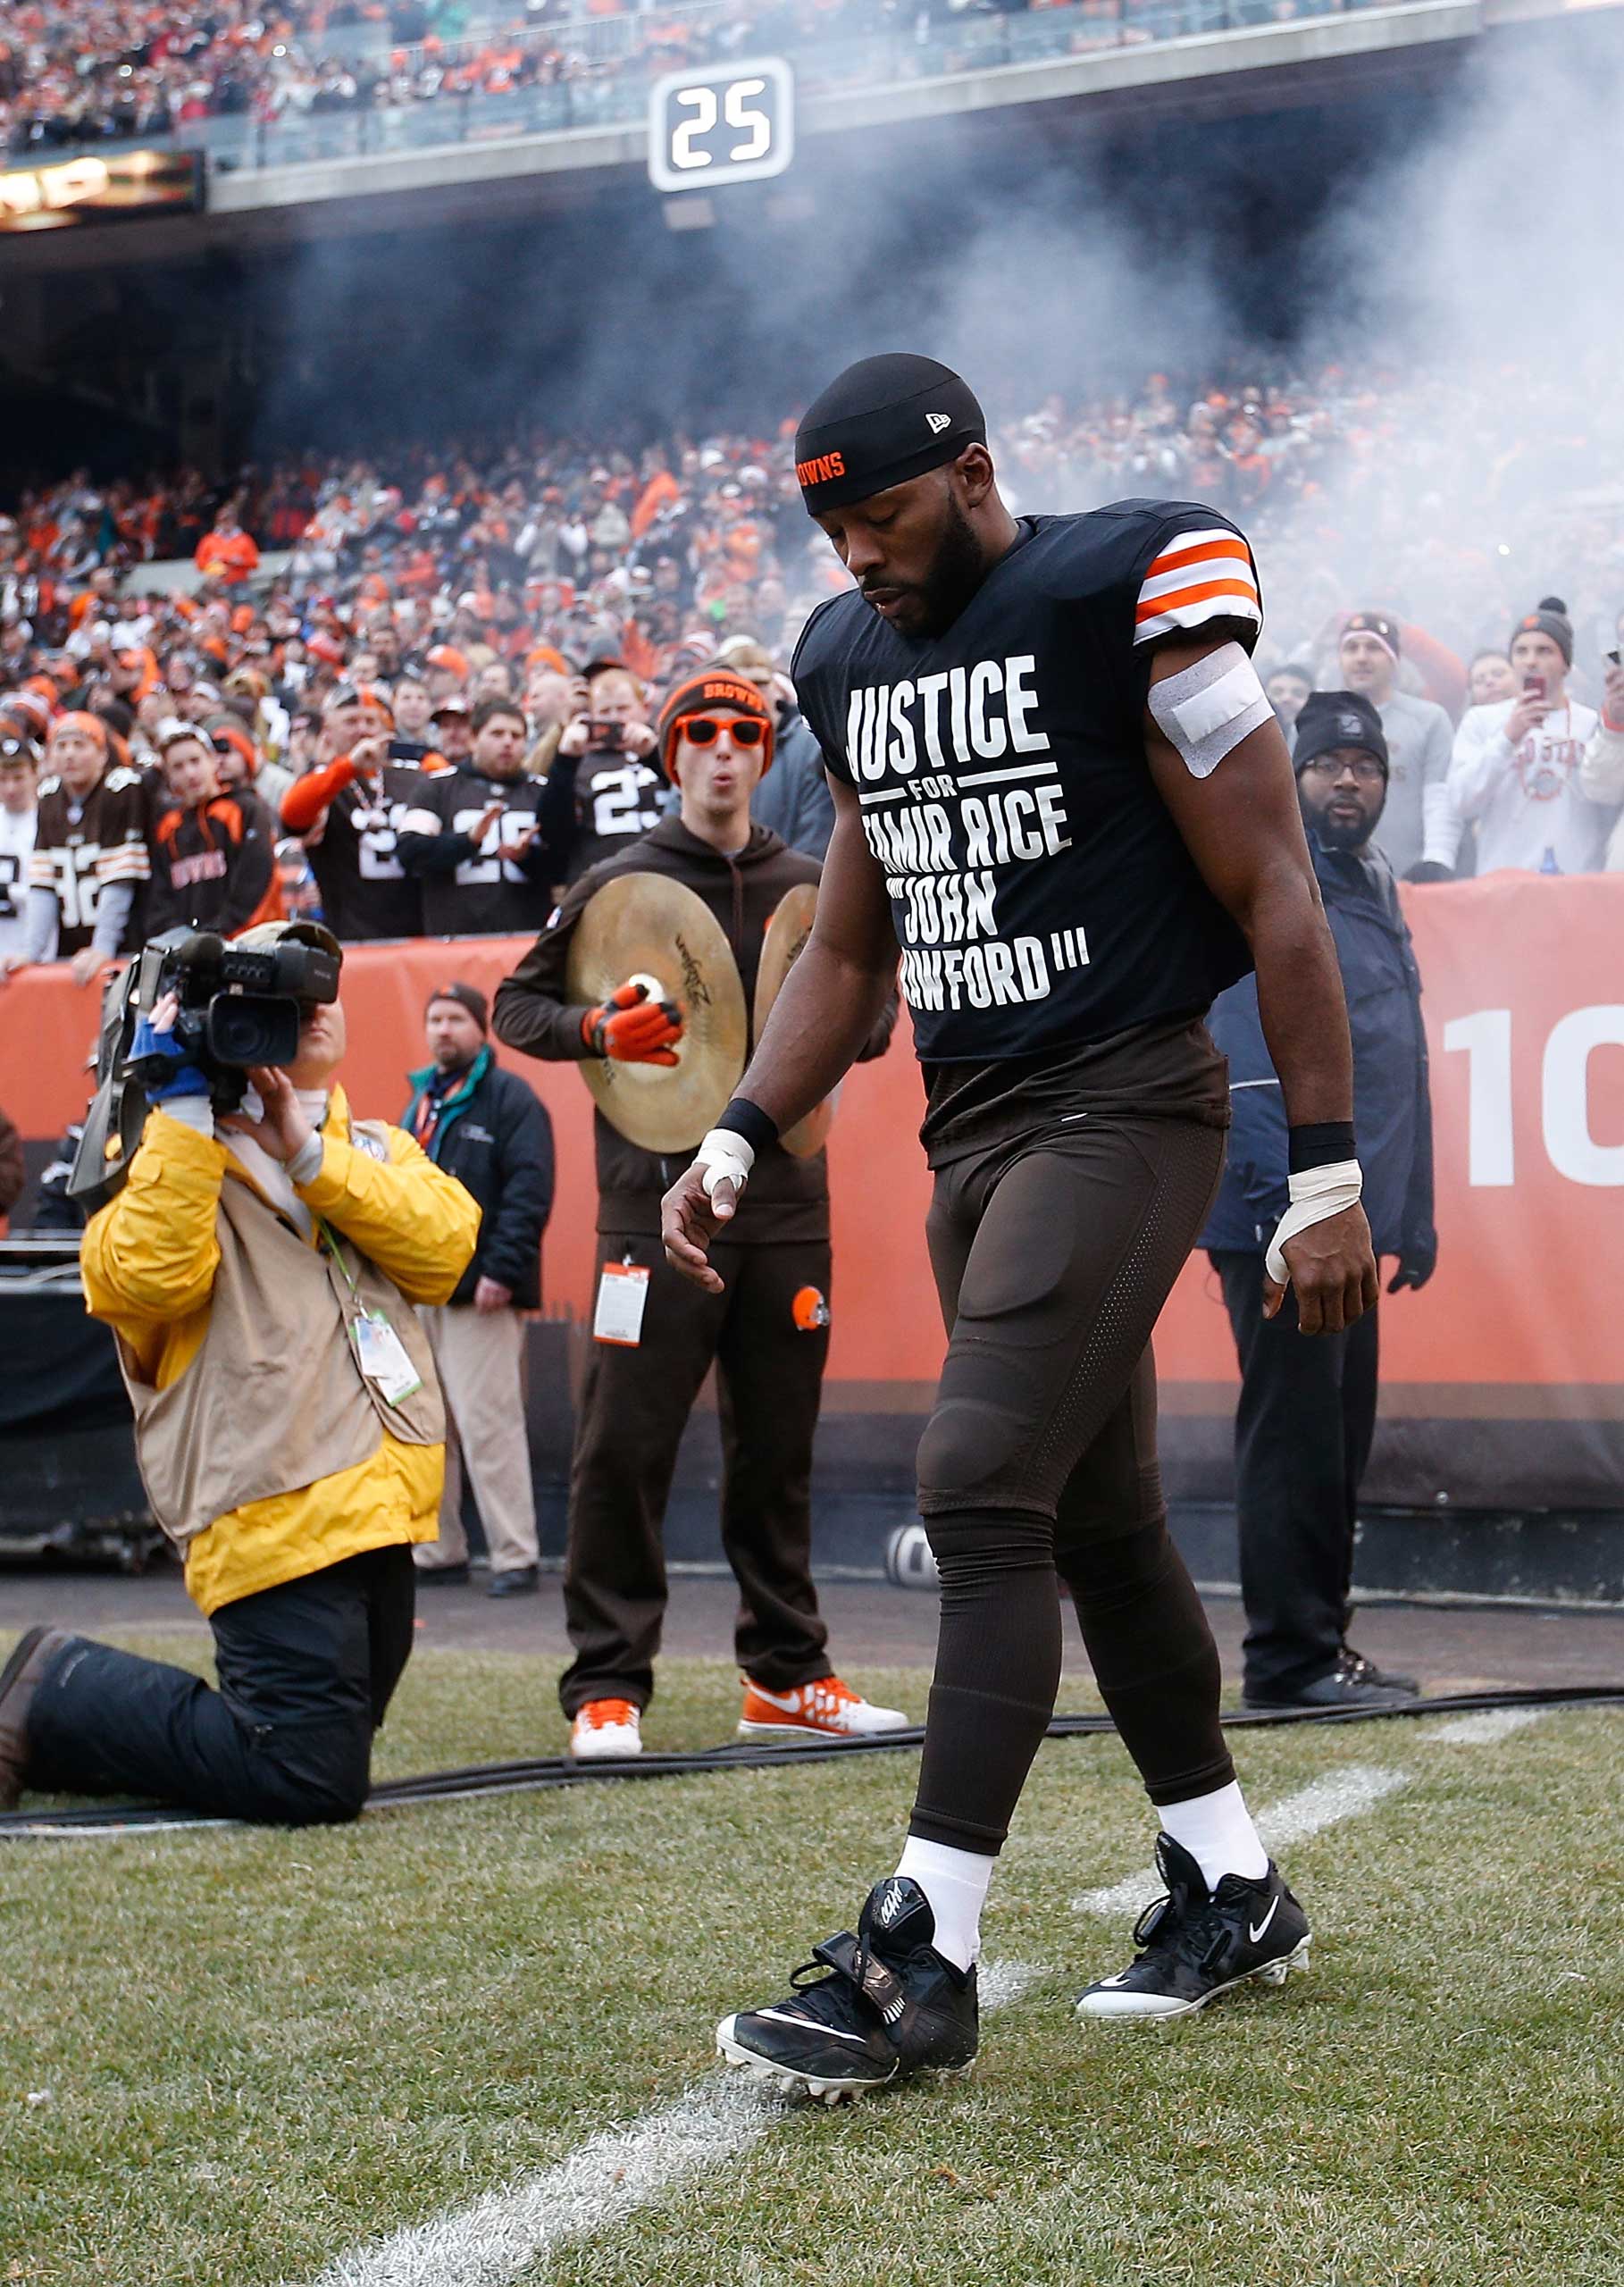 Andrew Hawkins #16 of the Cleveland Browns walks onto the field while wearing a protest shirt during introductions prior to the game against the Cincinnati Bengals at FirstEnergy Stadium in Cleveland on Dec. 14, 2014. (Joe Robbins—Getty Images)